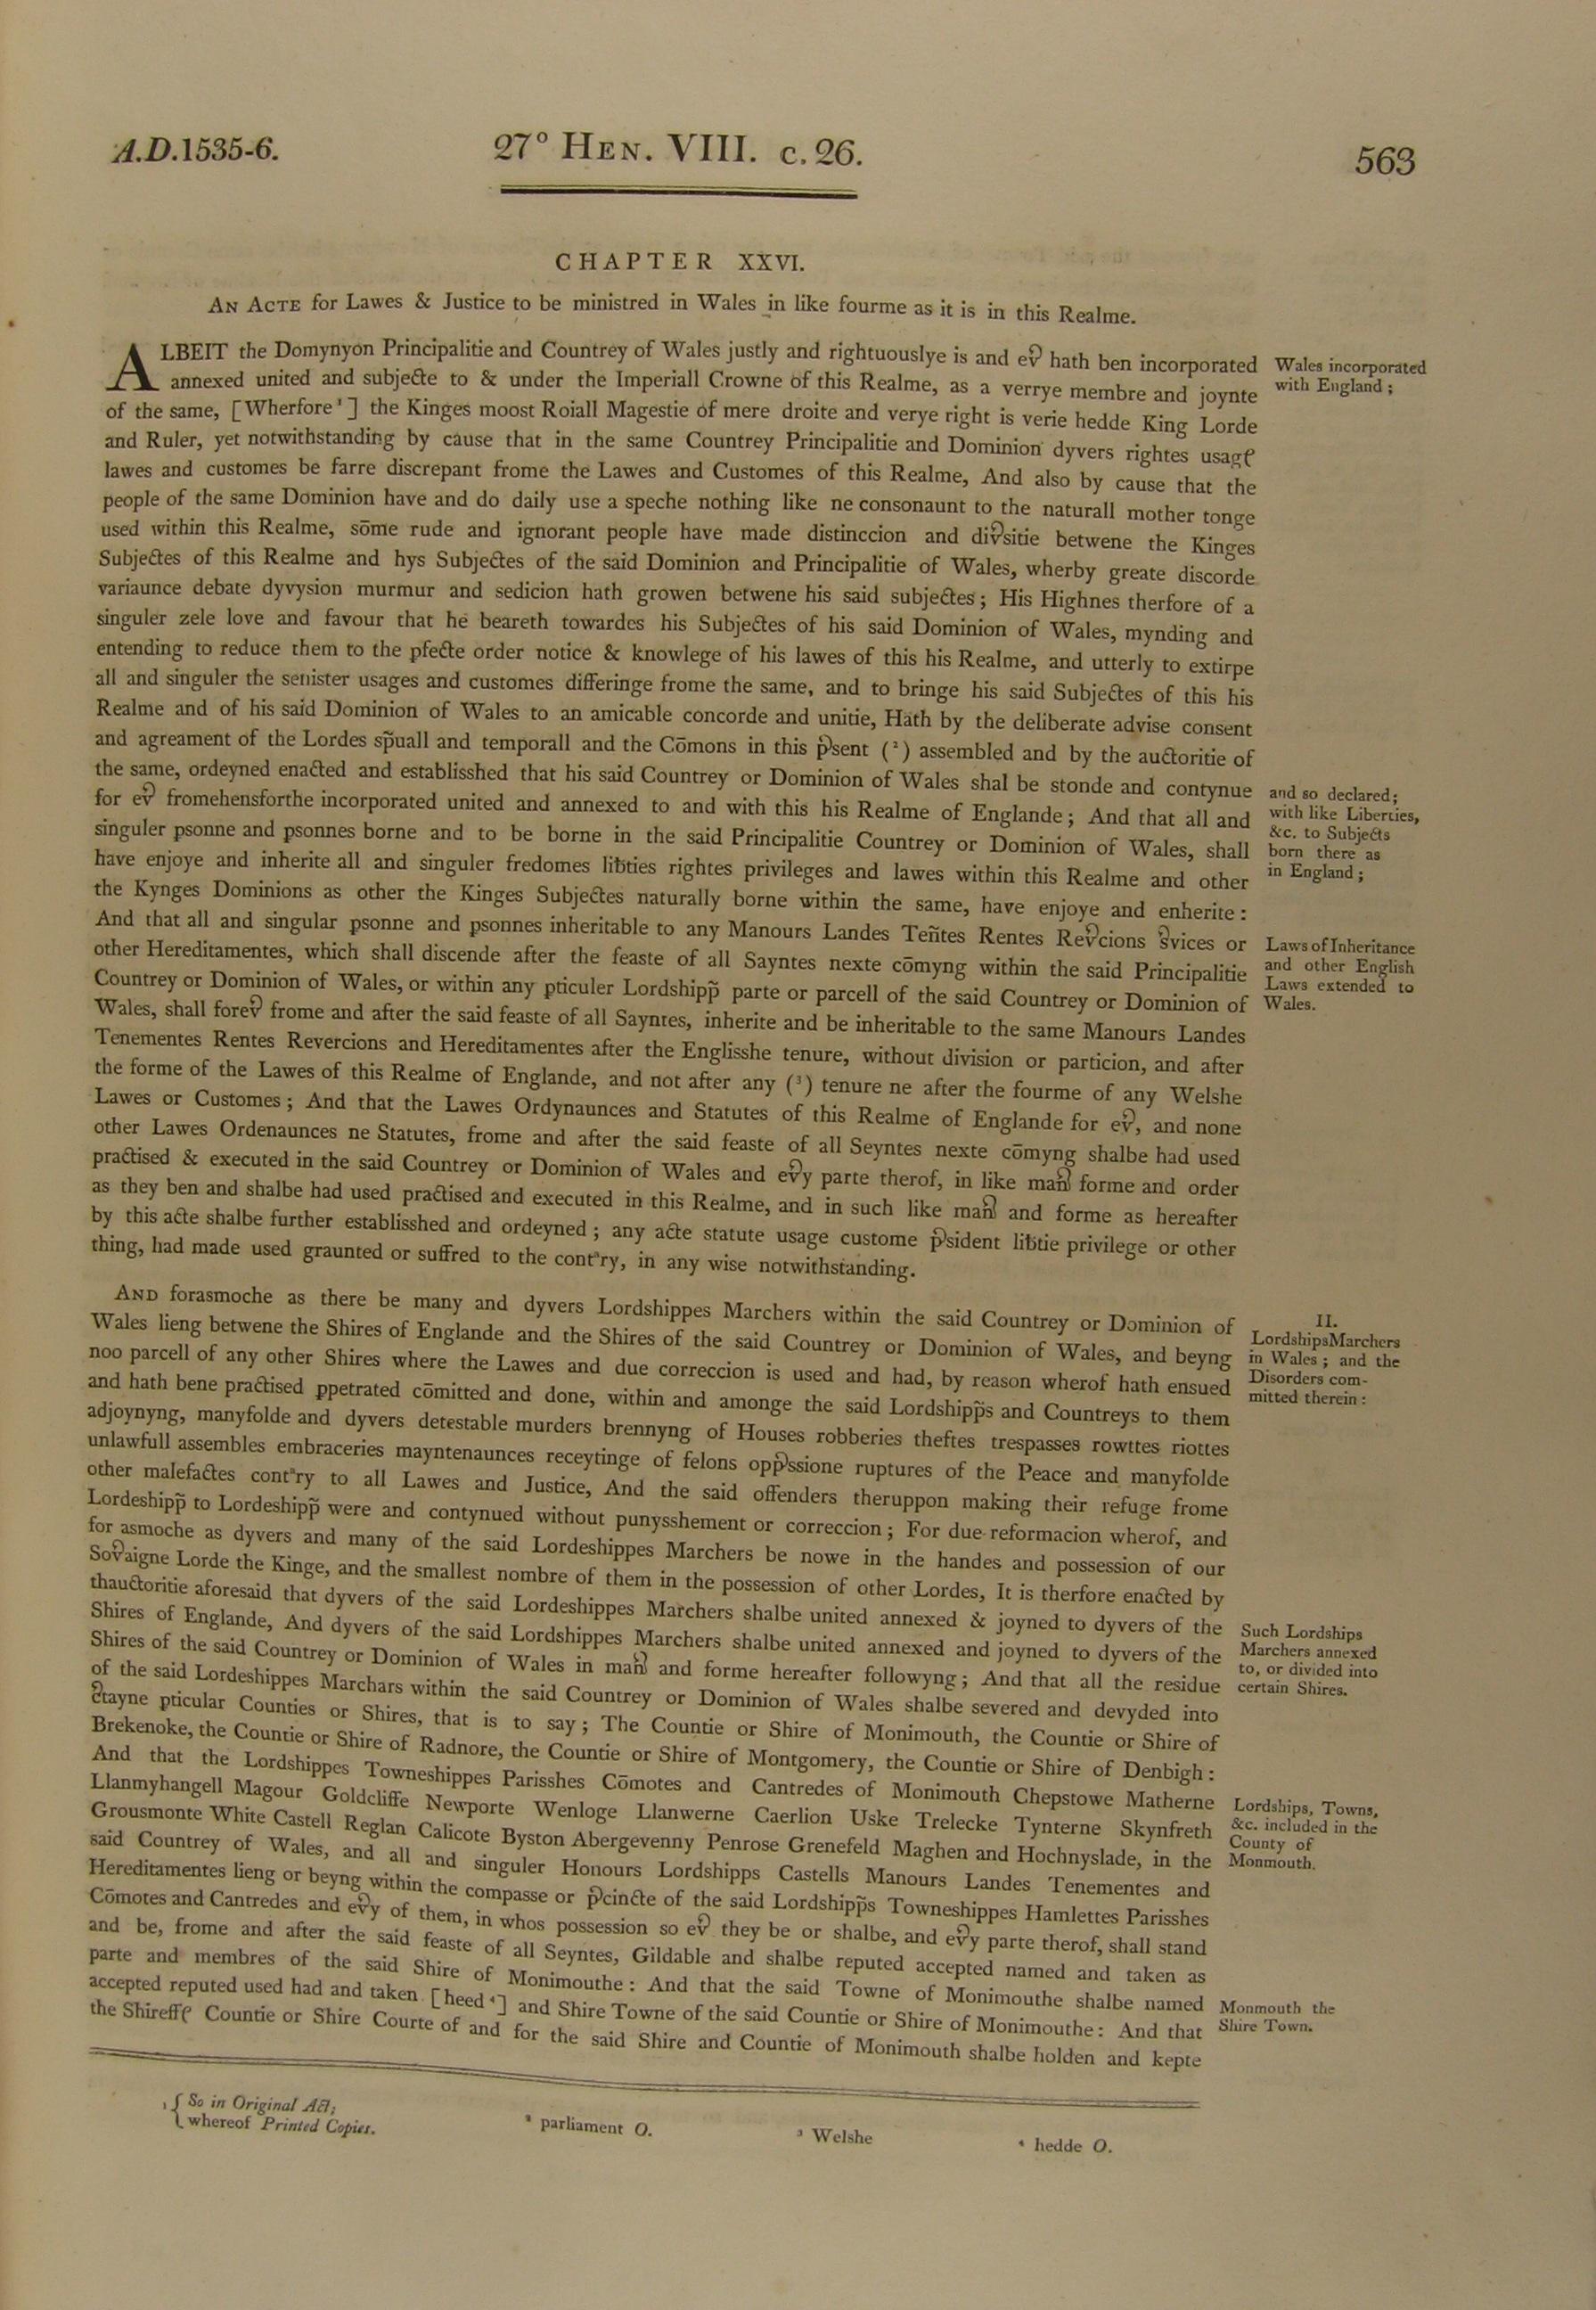 Image of 27 Henry VIII, c. 26 (page 1 of 7). Click for larger image.